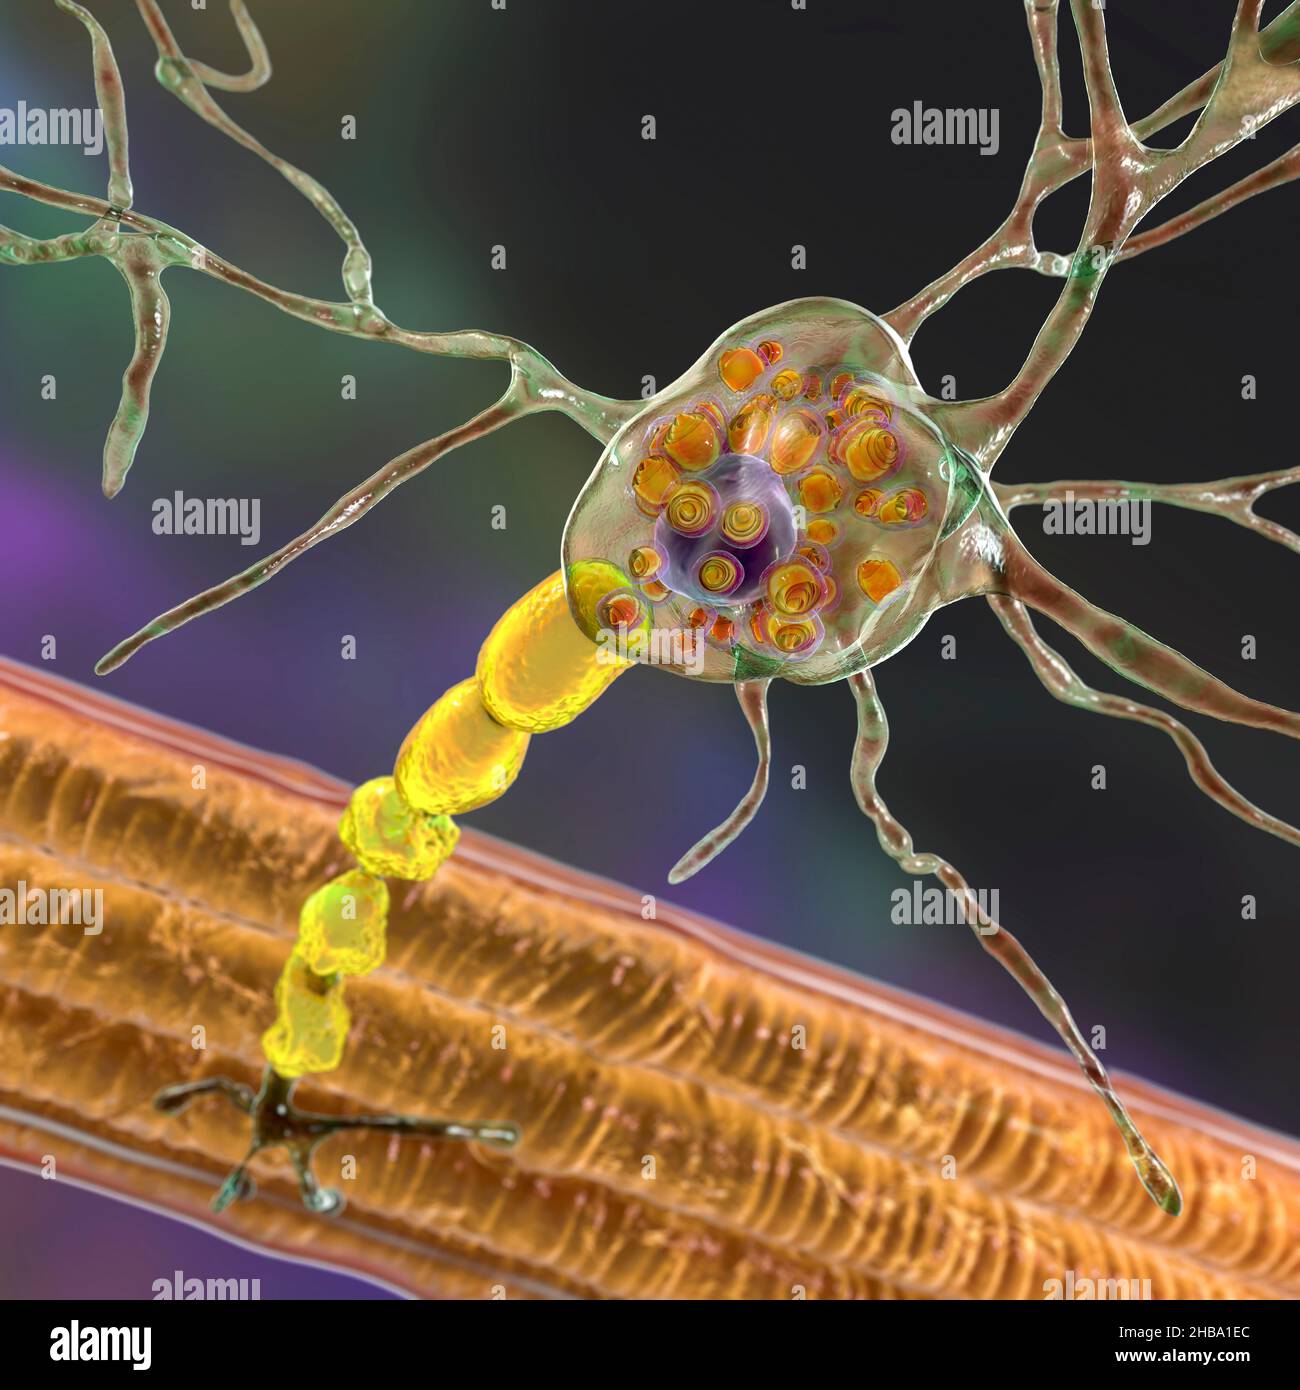 Neurons in Tay-Sachs disease. Illustration showing swollen neurons with membraneous lamellar inclusions due to accumulation of gangliosides in lysosomes, myelin degradation. Tay-Sachs disease is a  disorder that progressively destroys brain neurons, is caused by a mutation in the HEXA gene of chromosome 15 leading to deficiency of hexosaminidase A. Tay-sachs is most commonly seen in infants, manifesting in muscle weakness and decreased motor function, vision and hearing loss, and intellectual disability. Stock Photo